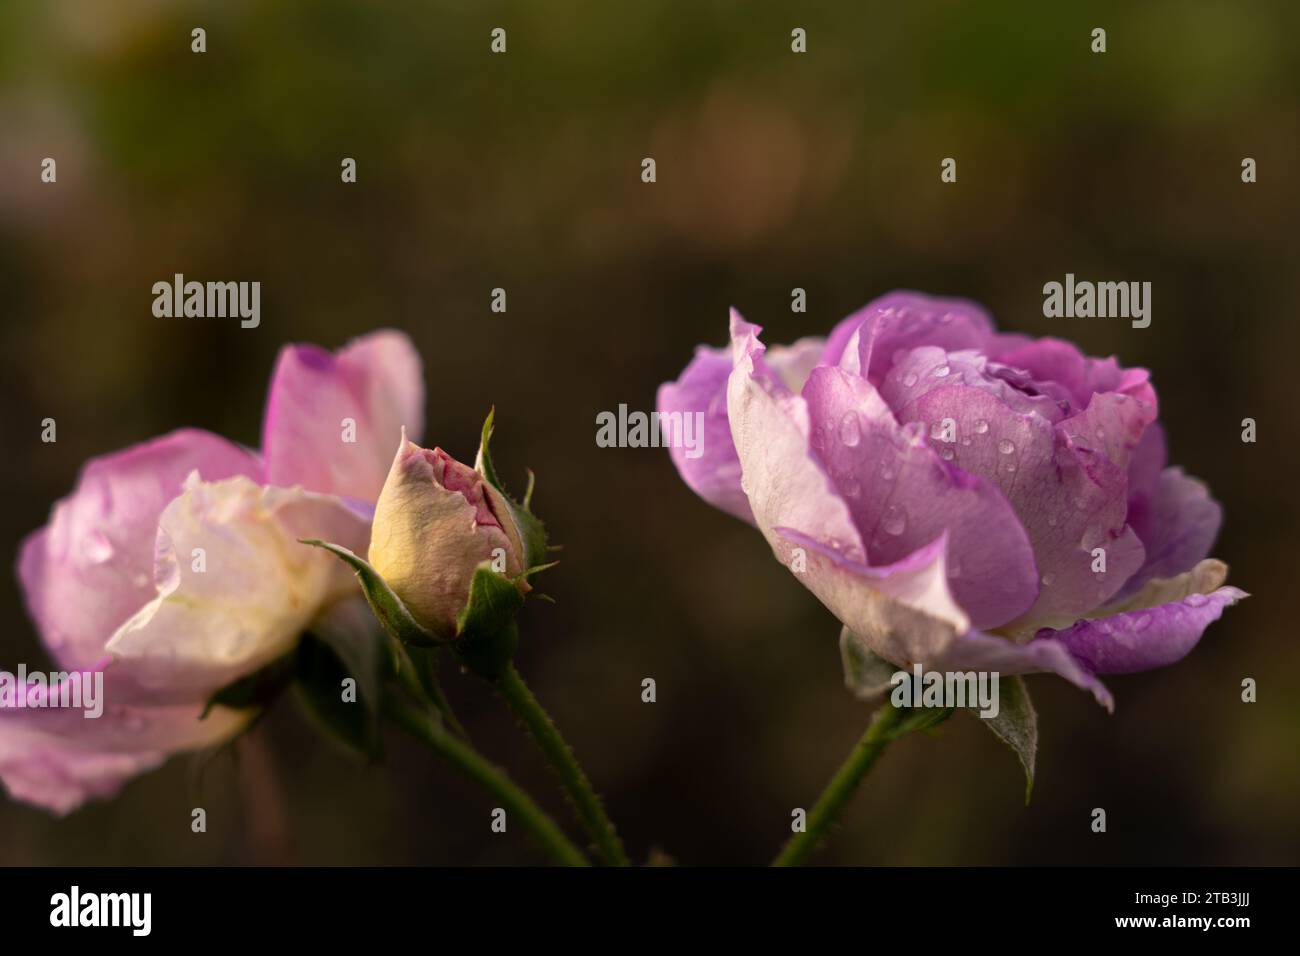 Purple and white wilting rose with water drops, green background Stock Photo